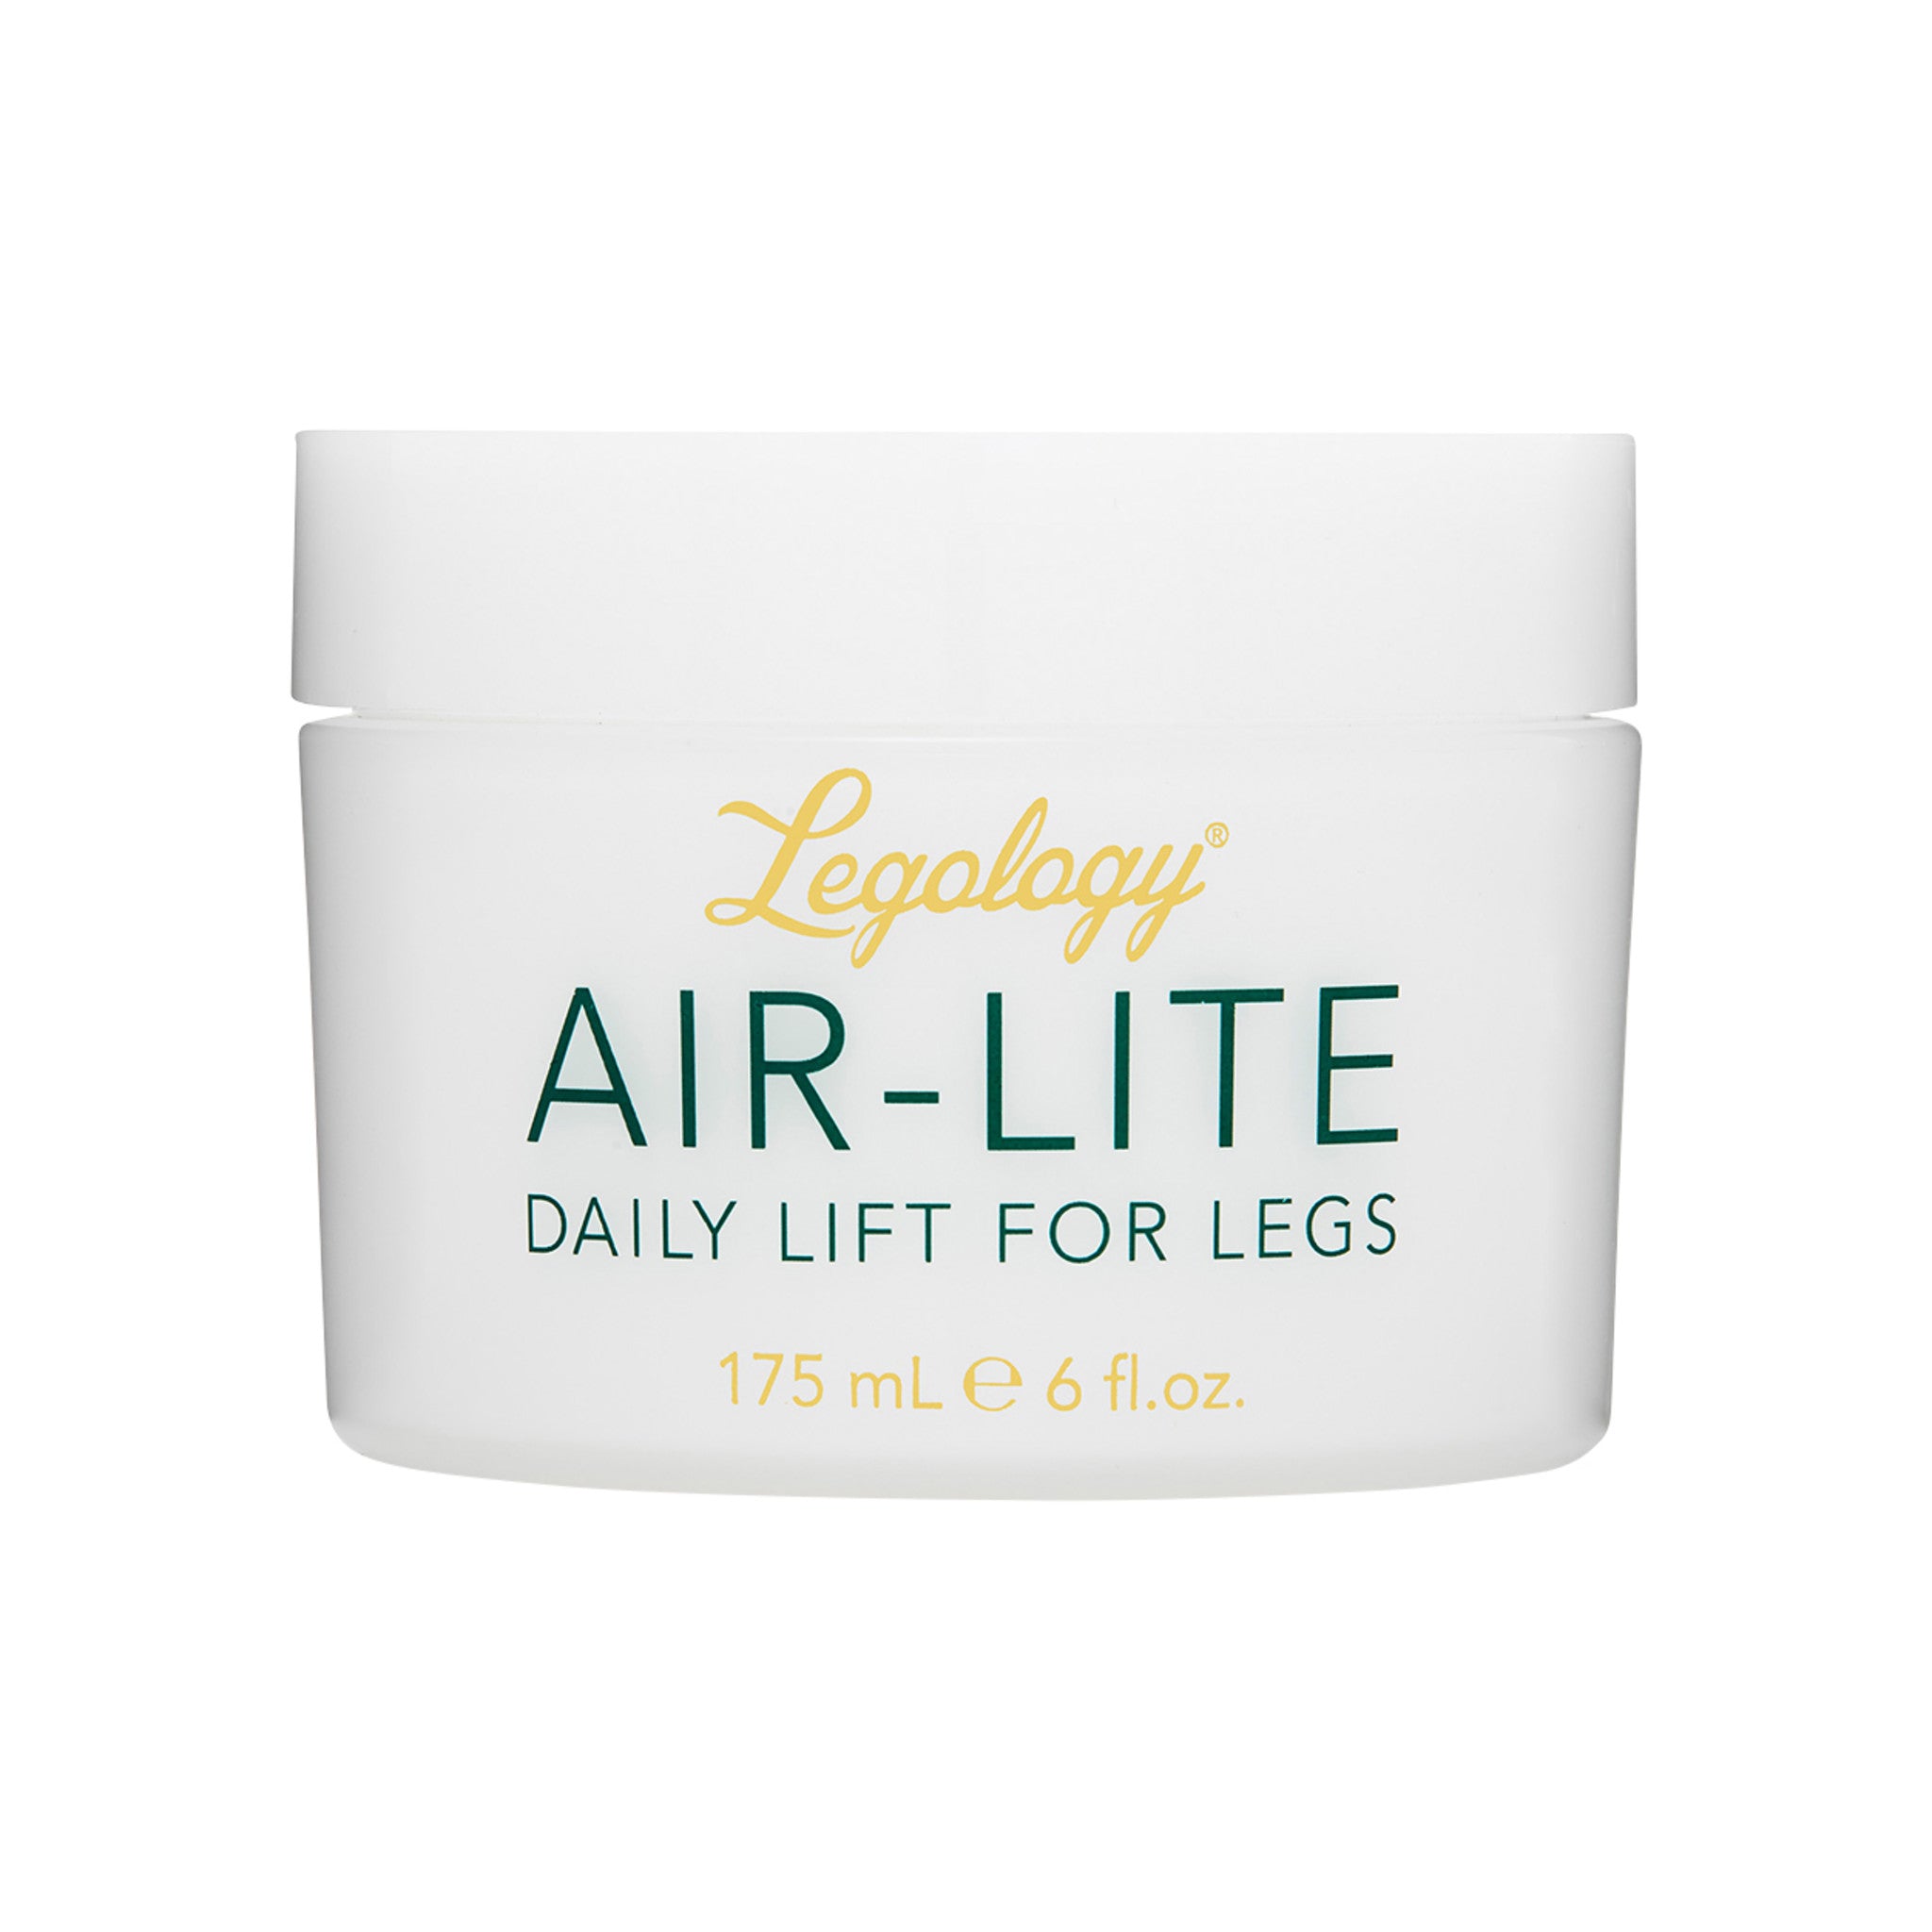 Legology Air-Lite Daily Lift for Legs Size variant: 6 oz main image.